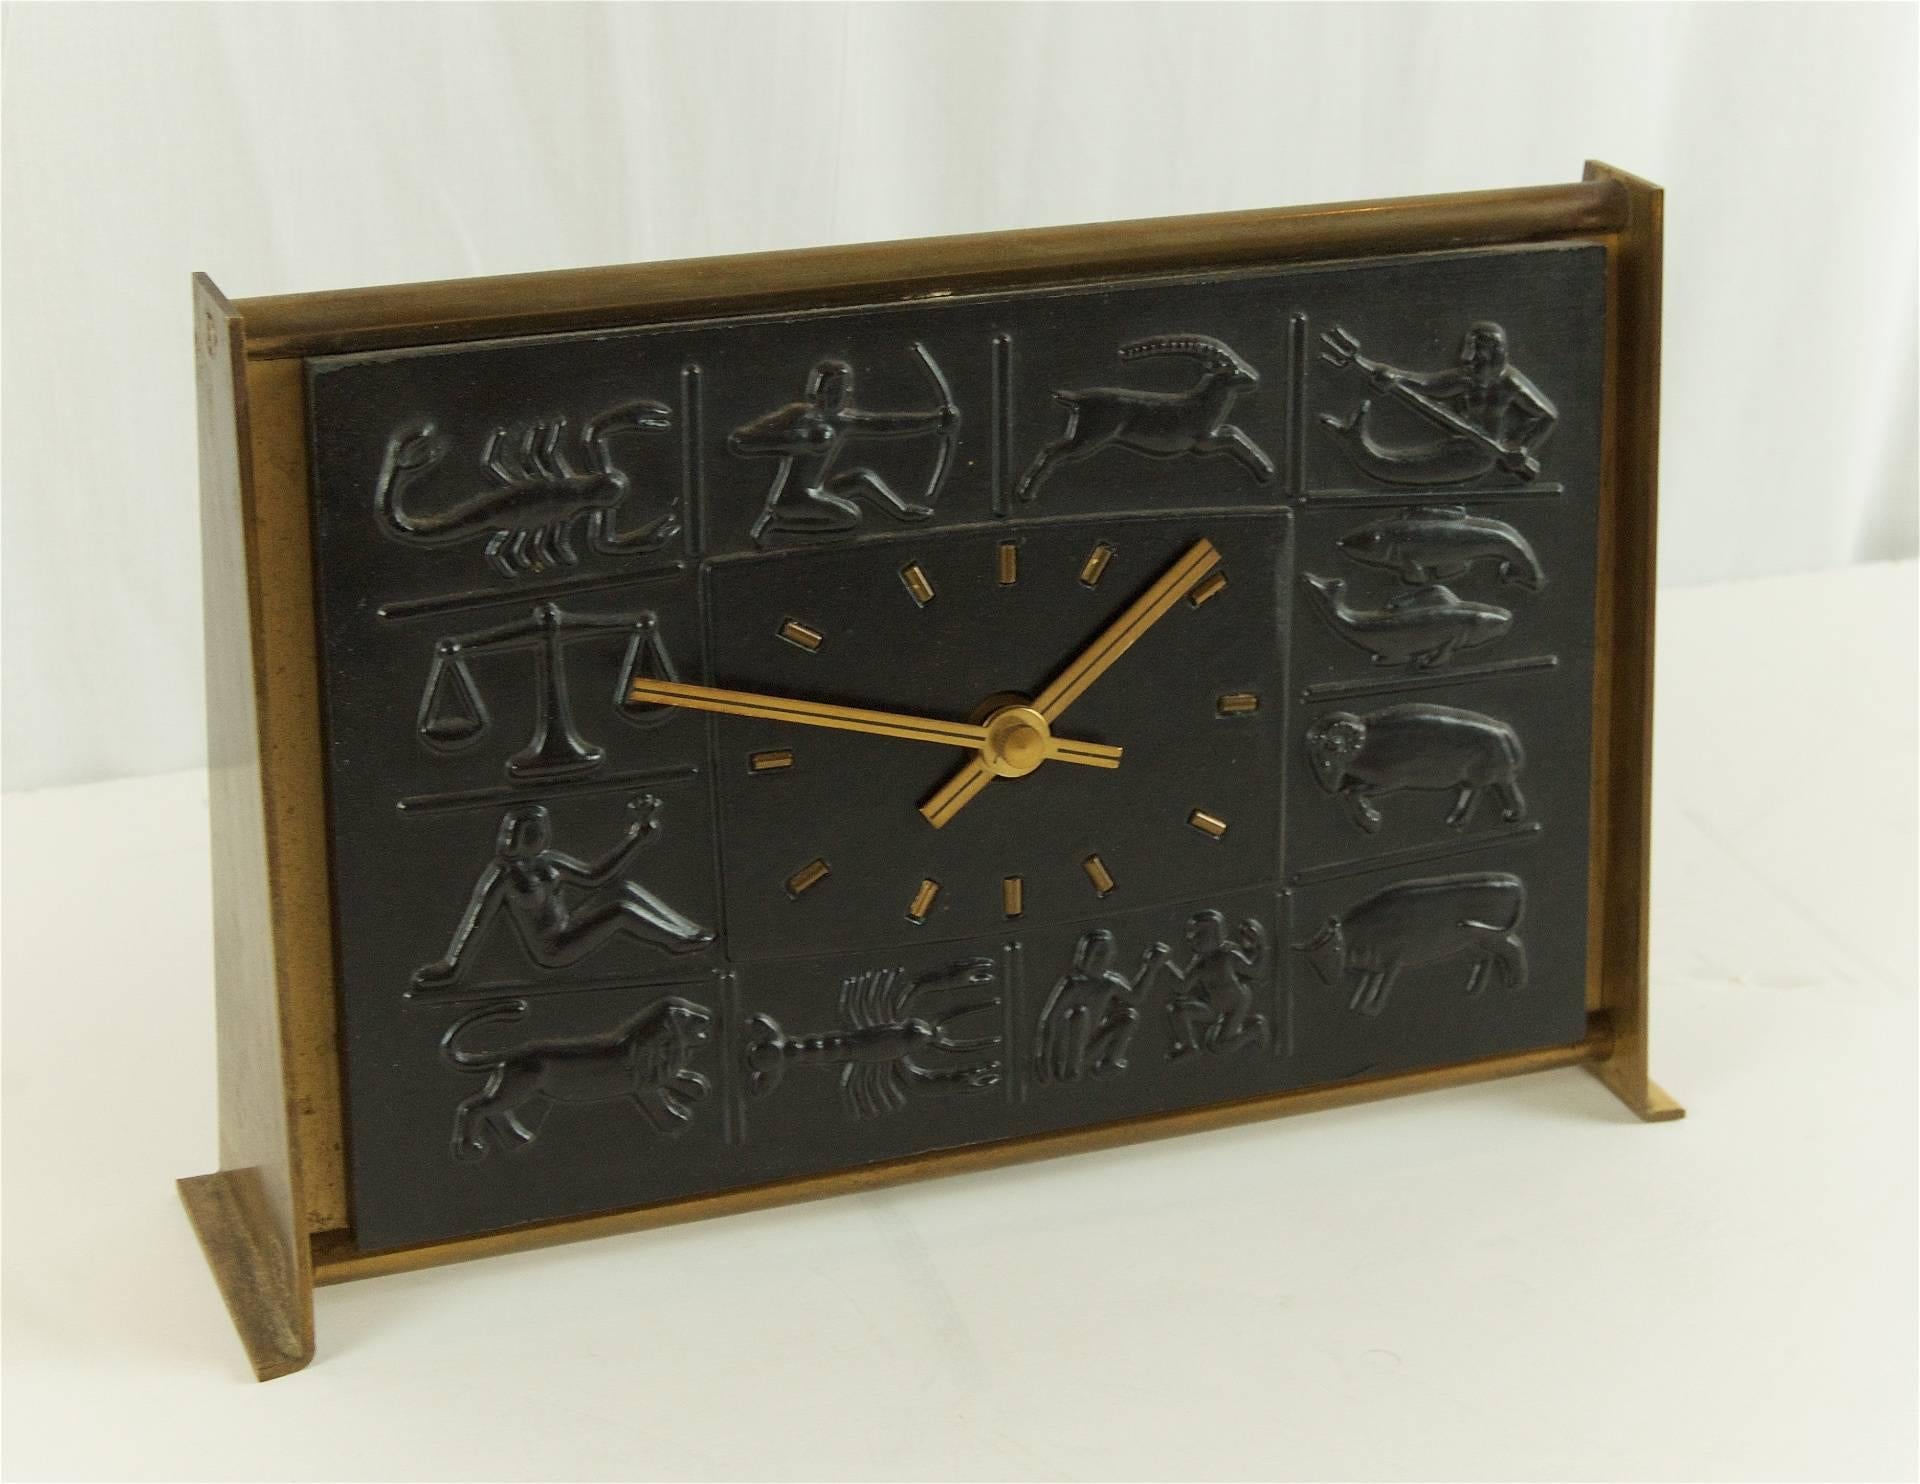 Unusual desk clock in brass and black bas-relief ceramic by Schatz.

Functioning, lacking battery compartment cover.